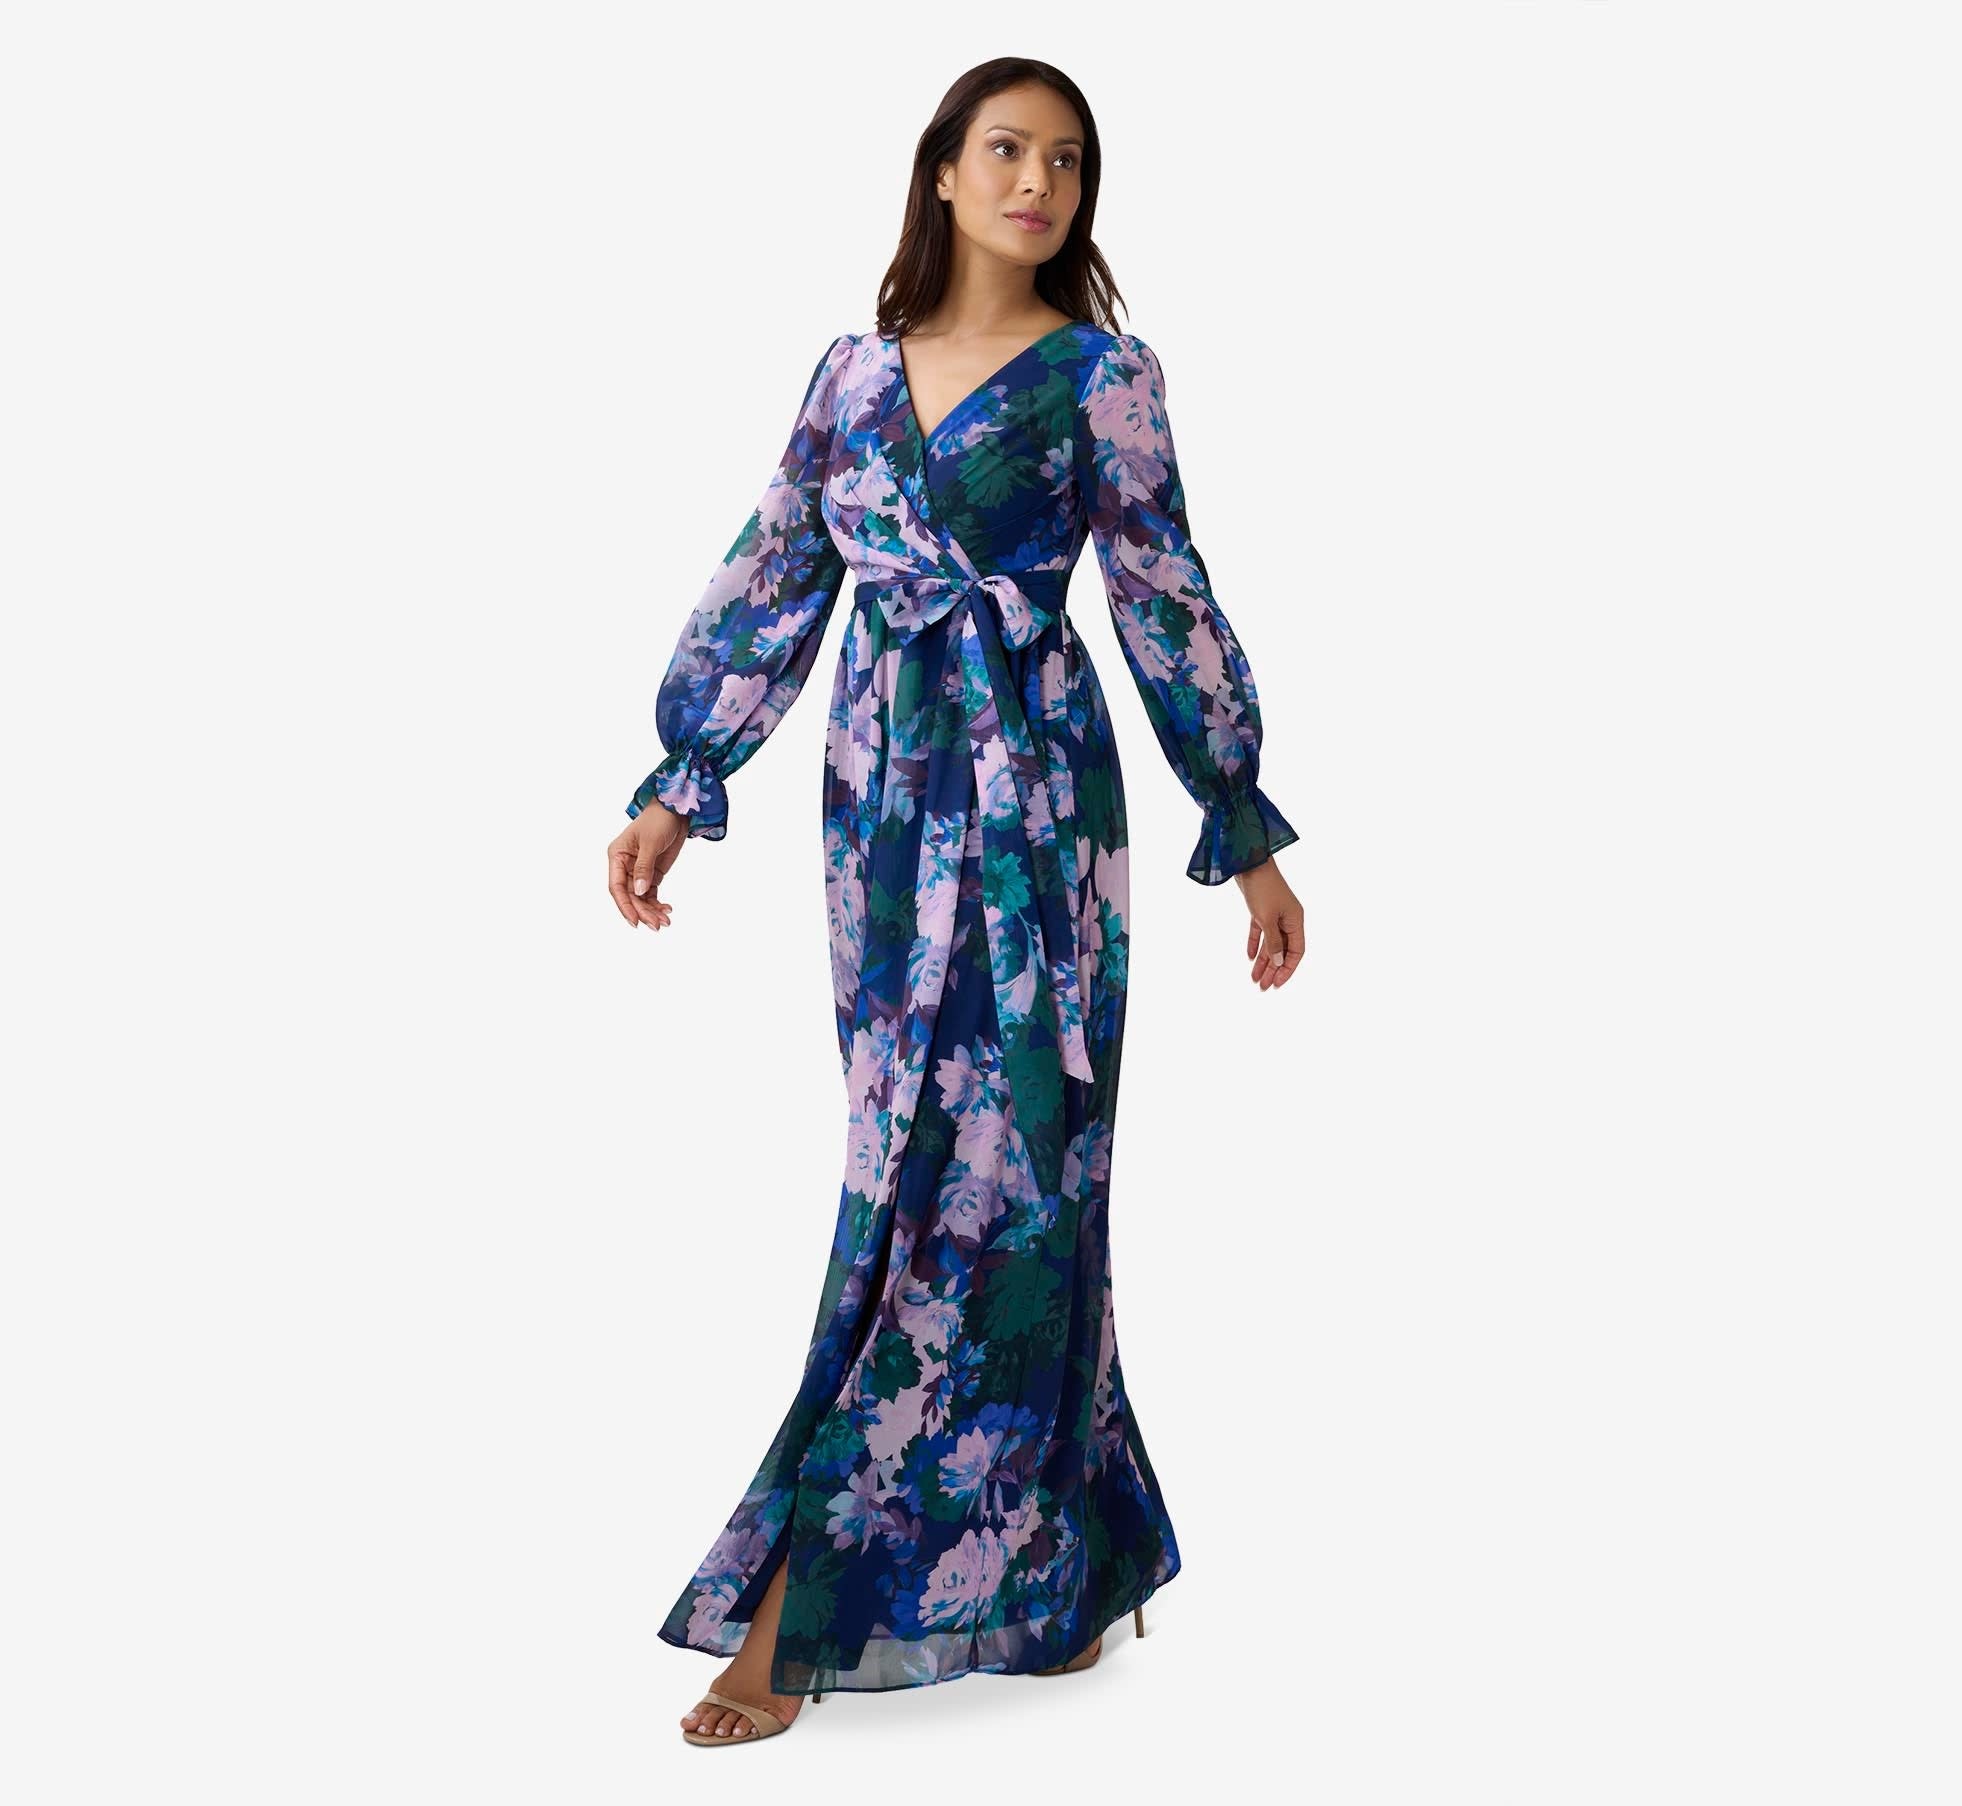 ADRIANNA PAPELL ADRIANNA PAPELL FLORAL PRINT CHIFFON GOWN DRESSES